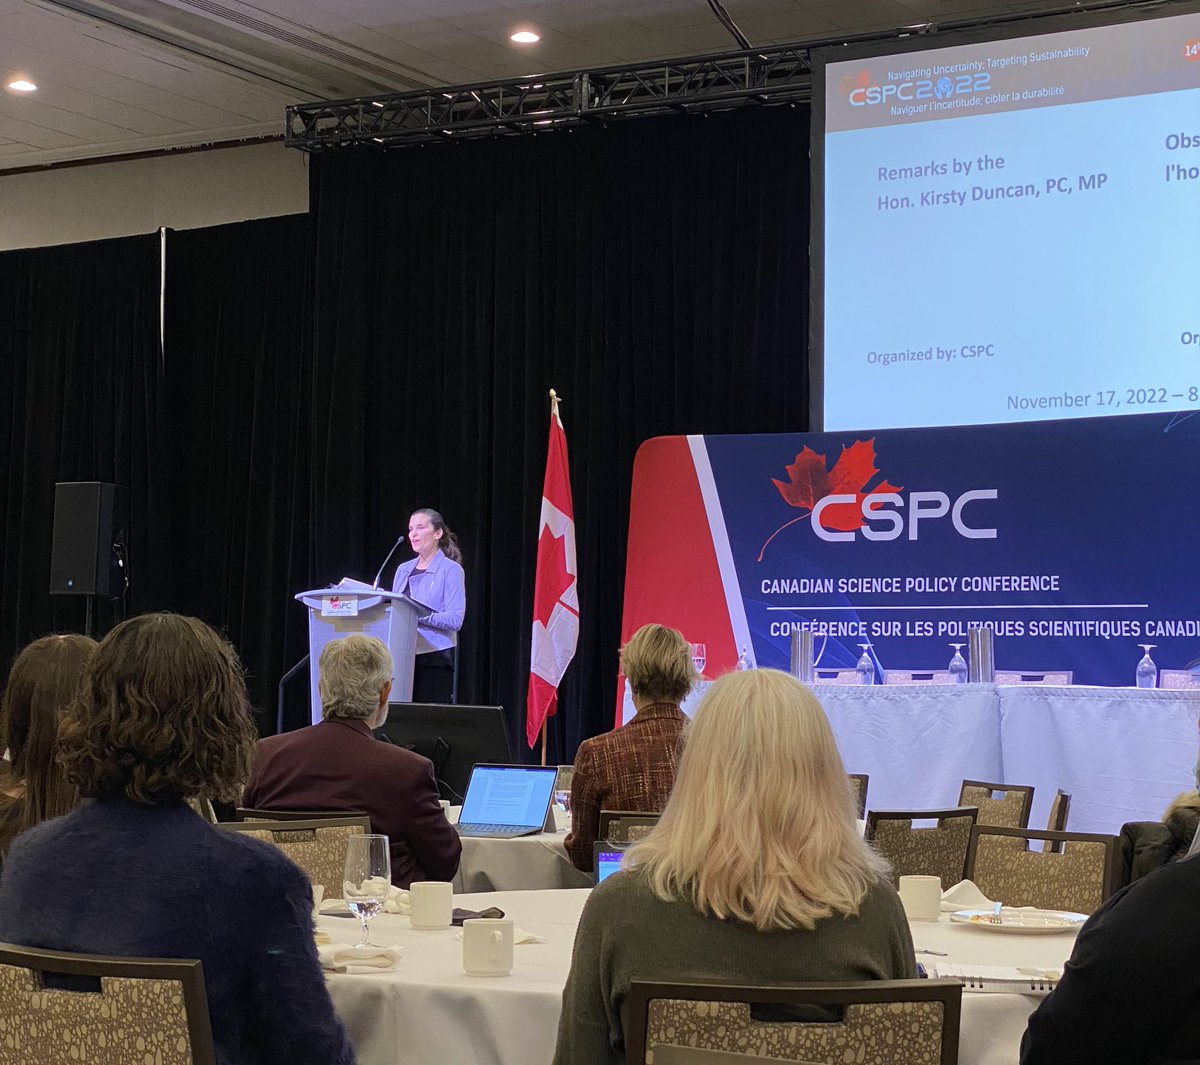 Science & research are public goods - @KirstyDuncanMP at #CSPC2022 @sciencepolicy